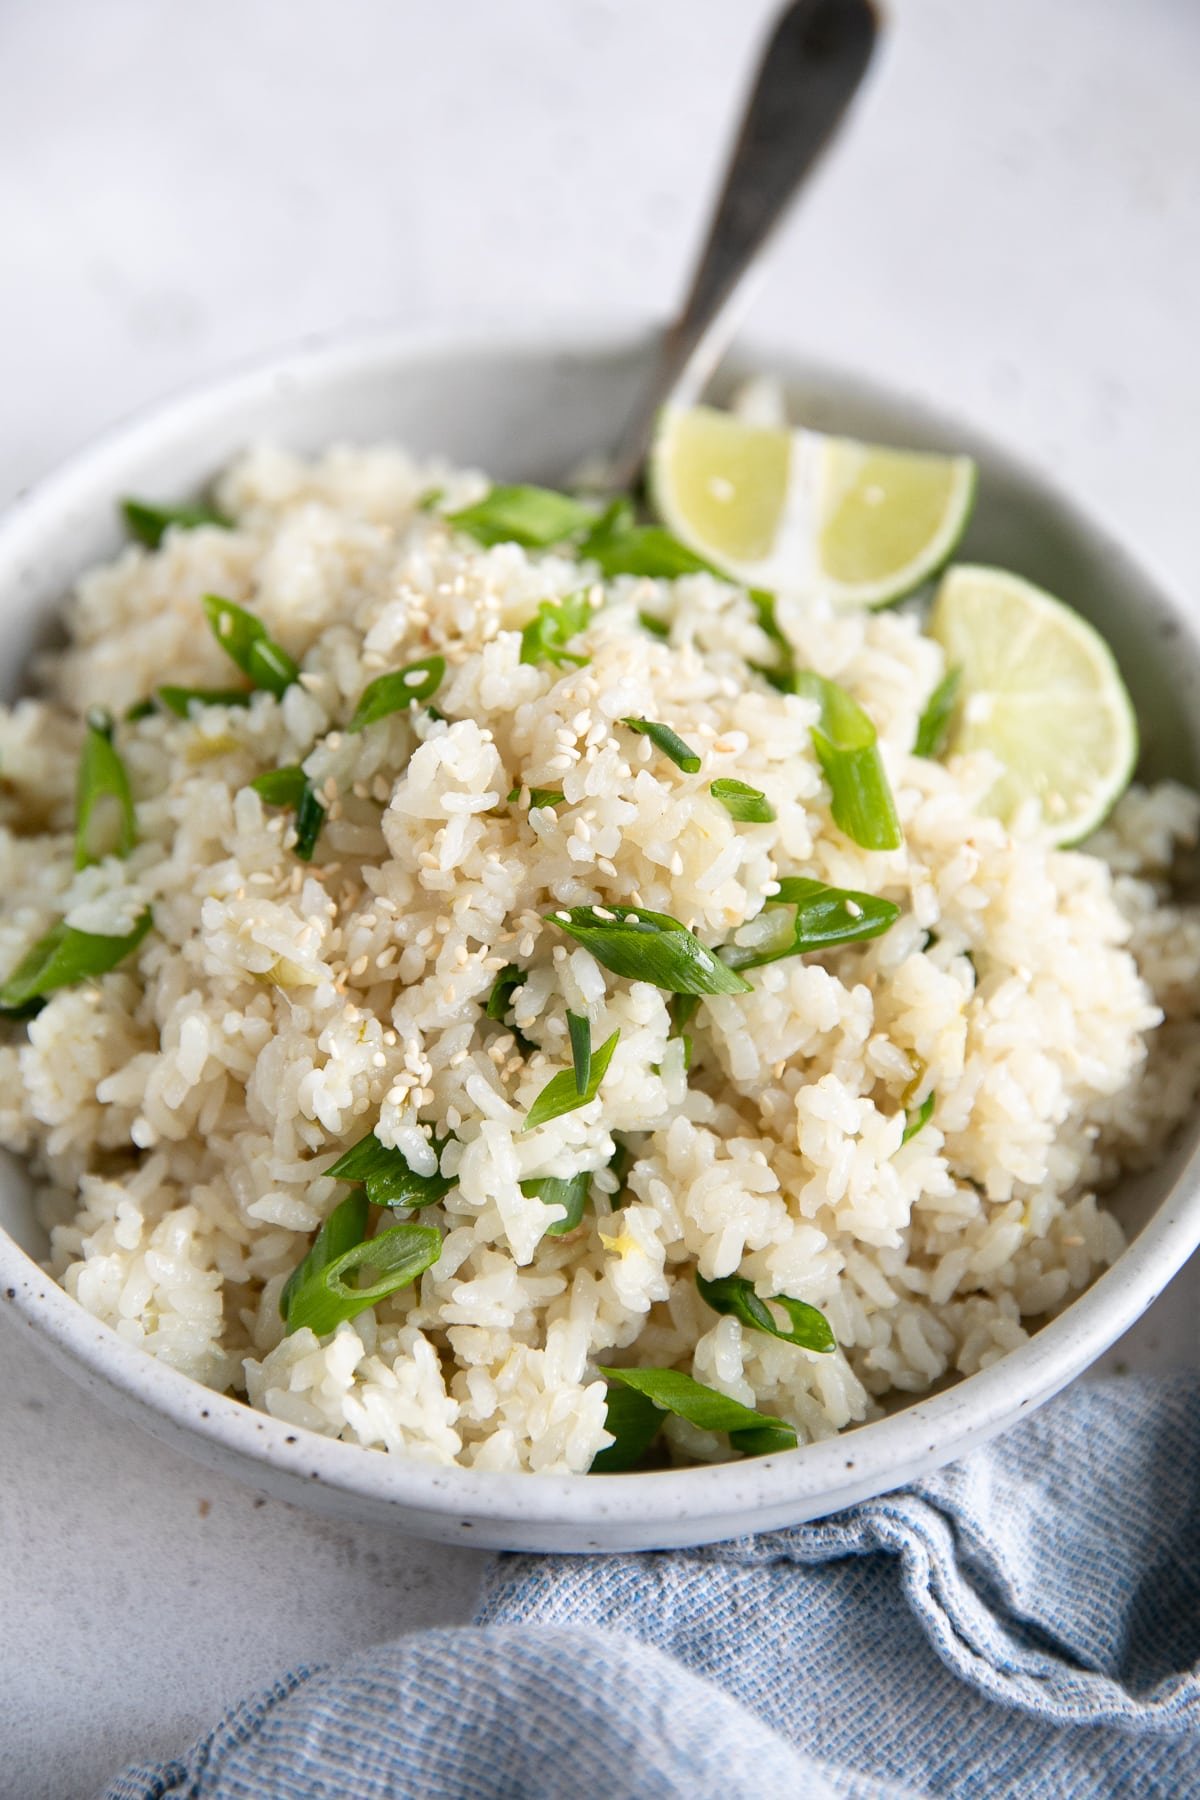 Coconut rice in a large white bowl garnished with sesame seeds and chopped green onions.